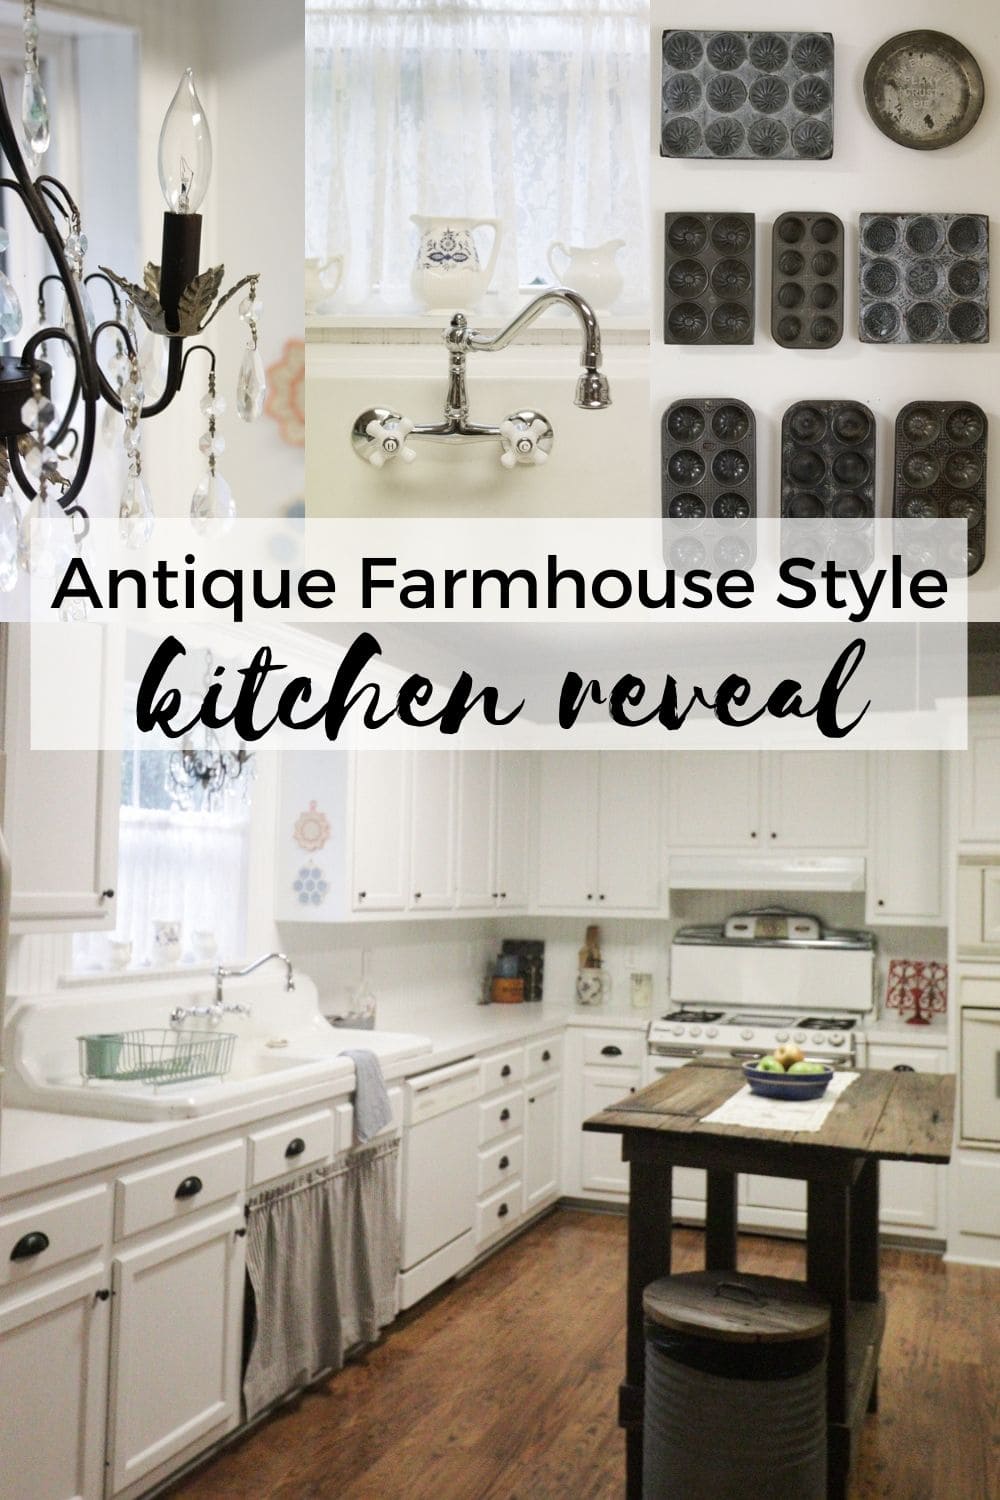 I'm so excited to finally be able to share my farmhouse kitchen reveal with you complete with authentic farmhouse elements like a double drain board cast iron sink, a vintage gas stove, and a bead board backsplash. #allwhitekitchen #farmhousestylekitchen #farmhousekitchenideas #modernfarmhousekitchen